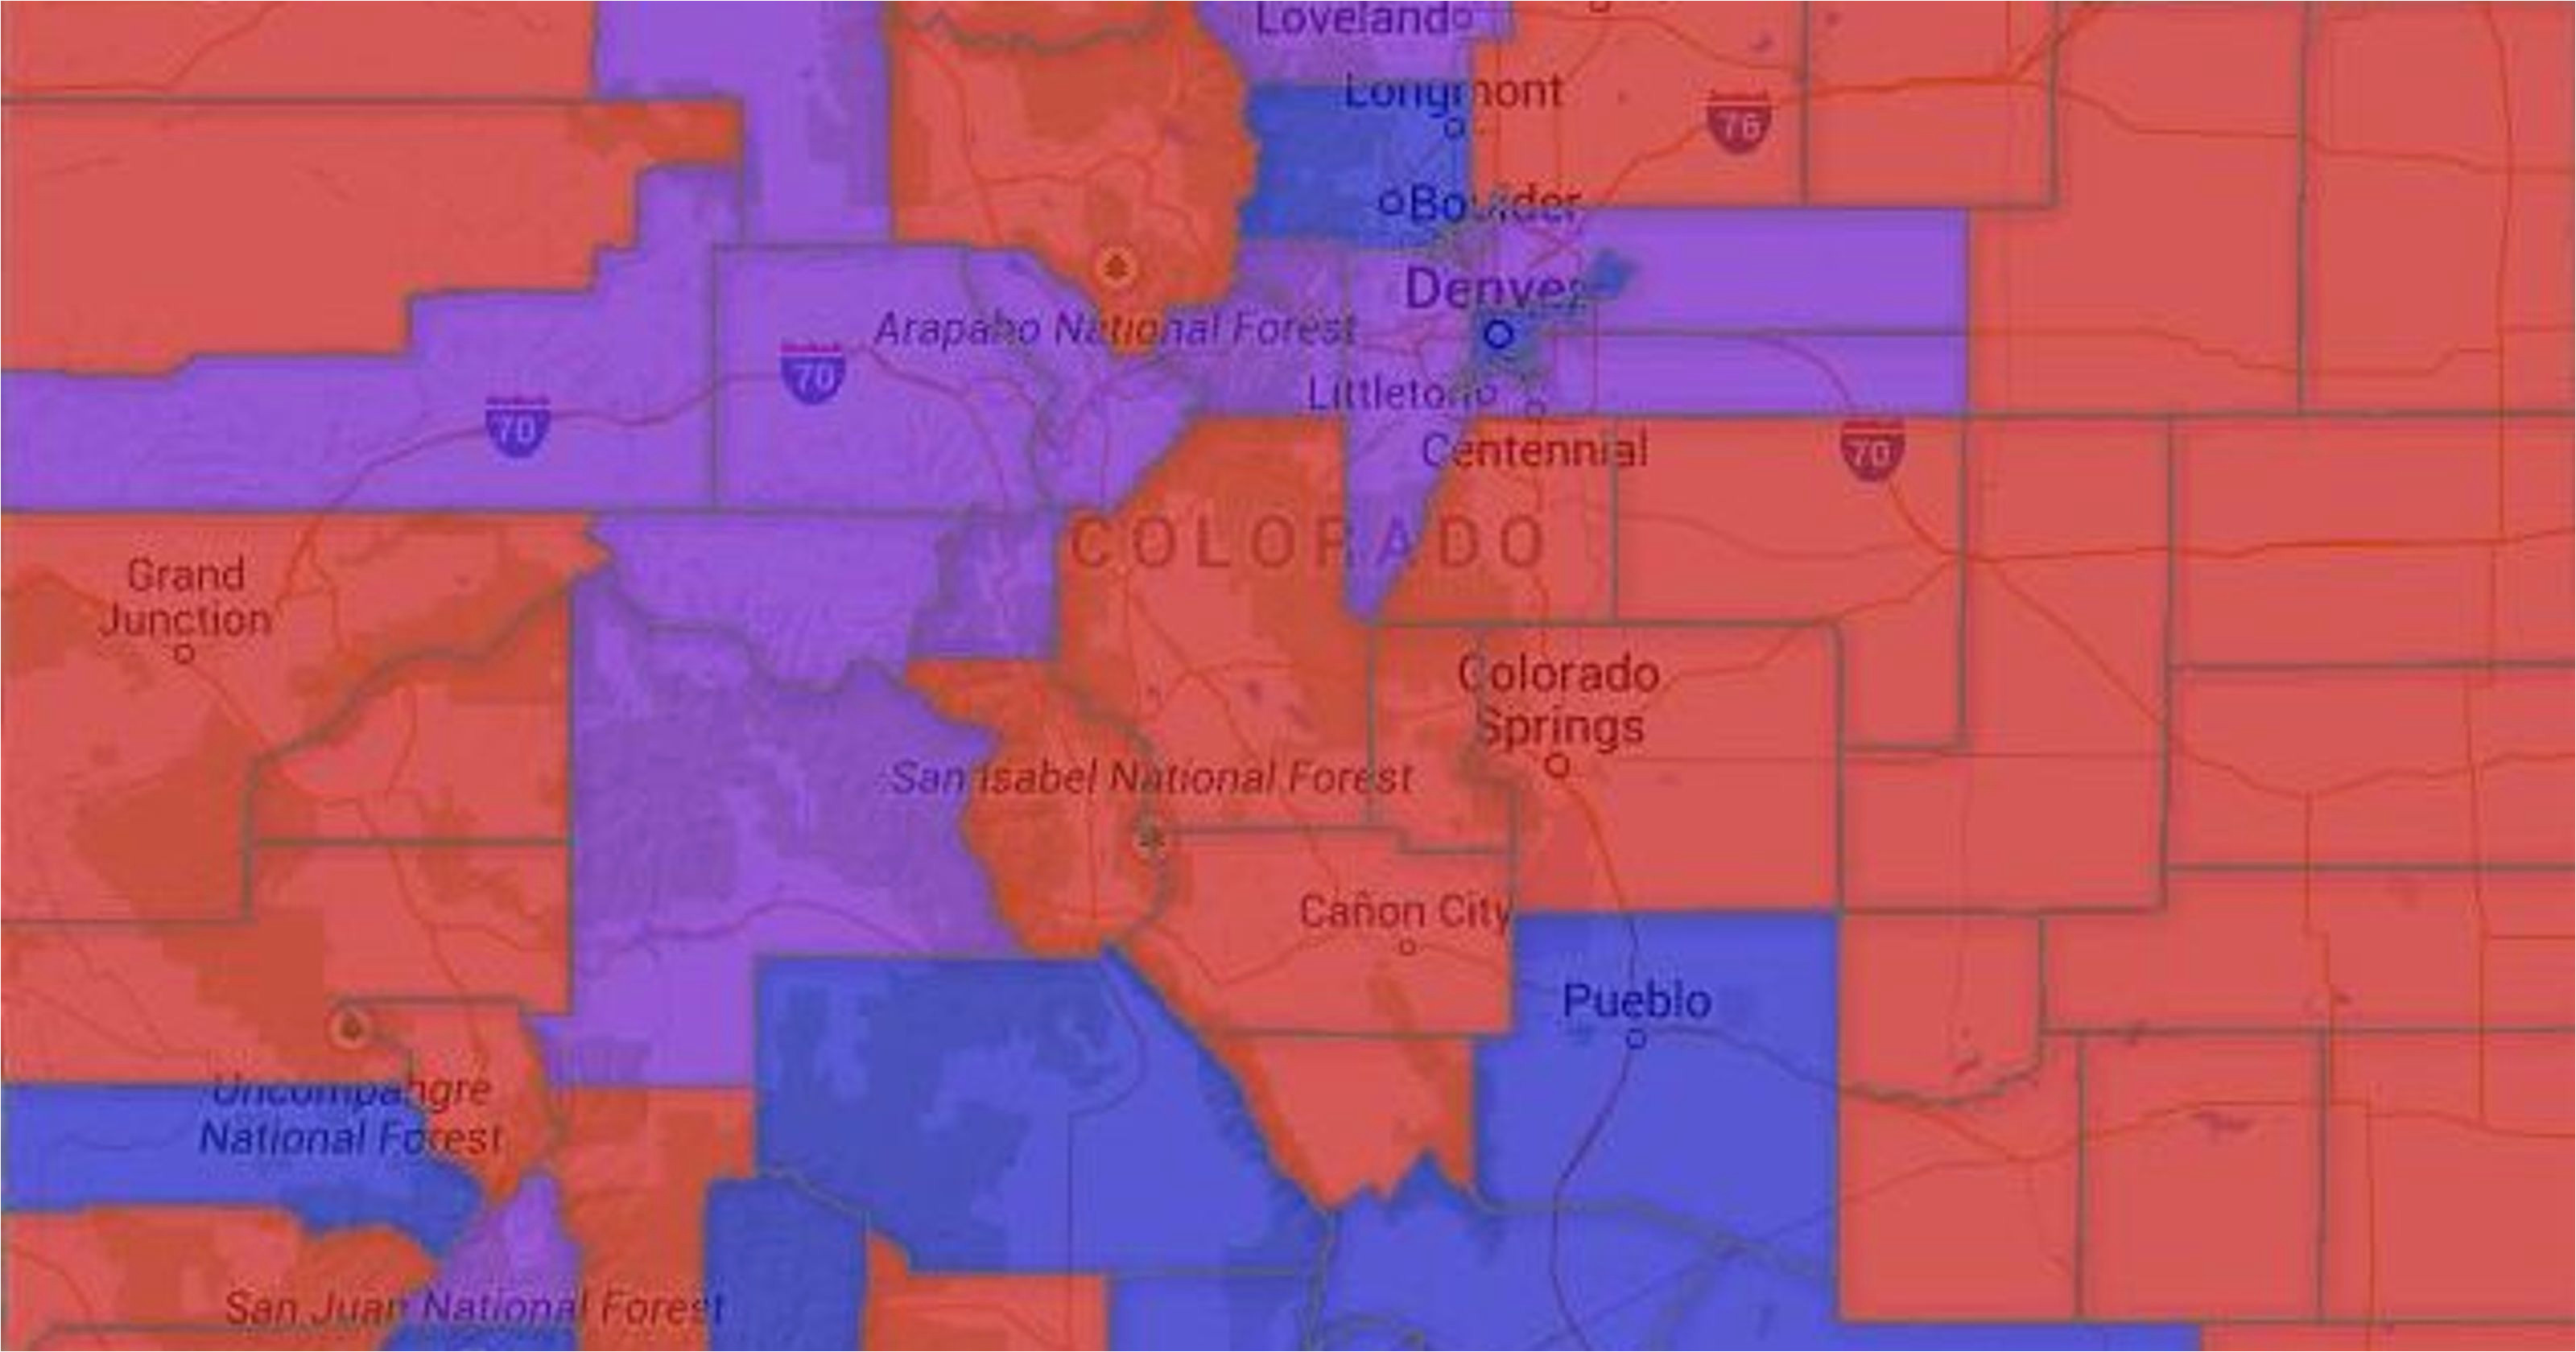 Loveland Colorado Zip Code Map Map Colorado Voter Party Affiliation by County